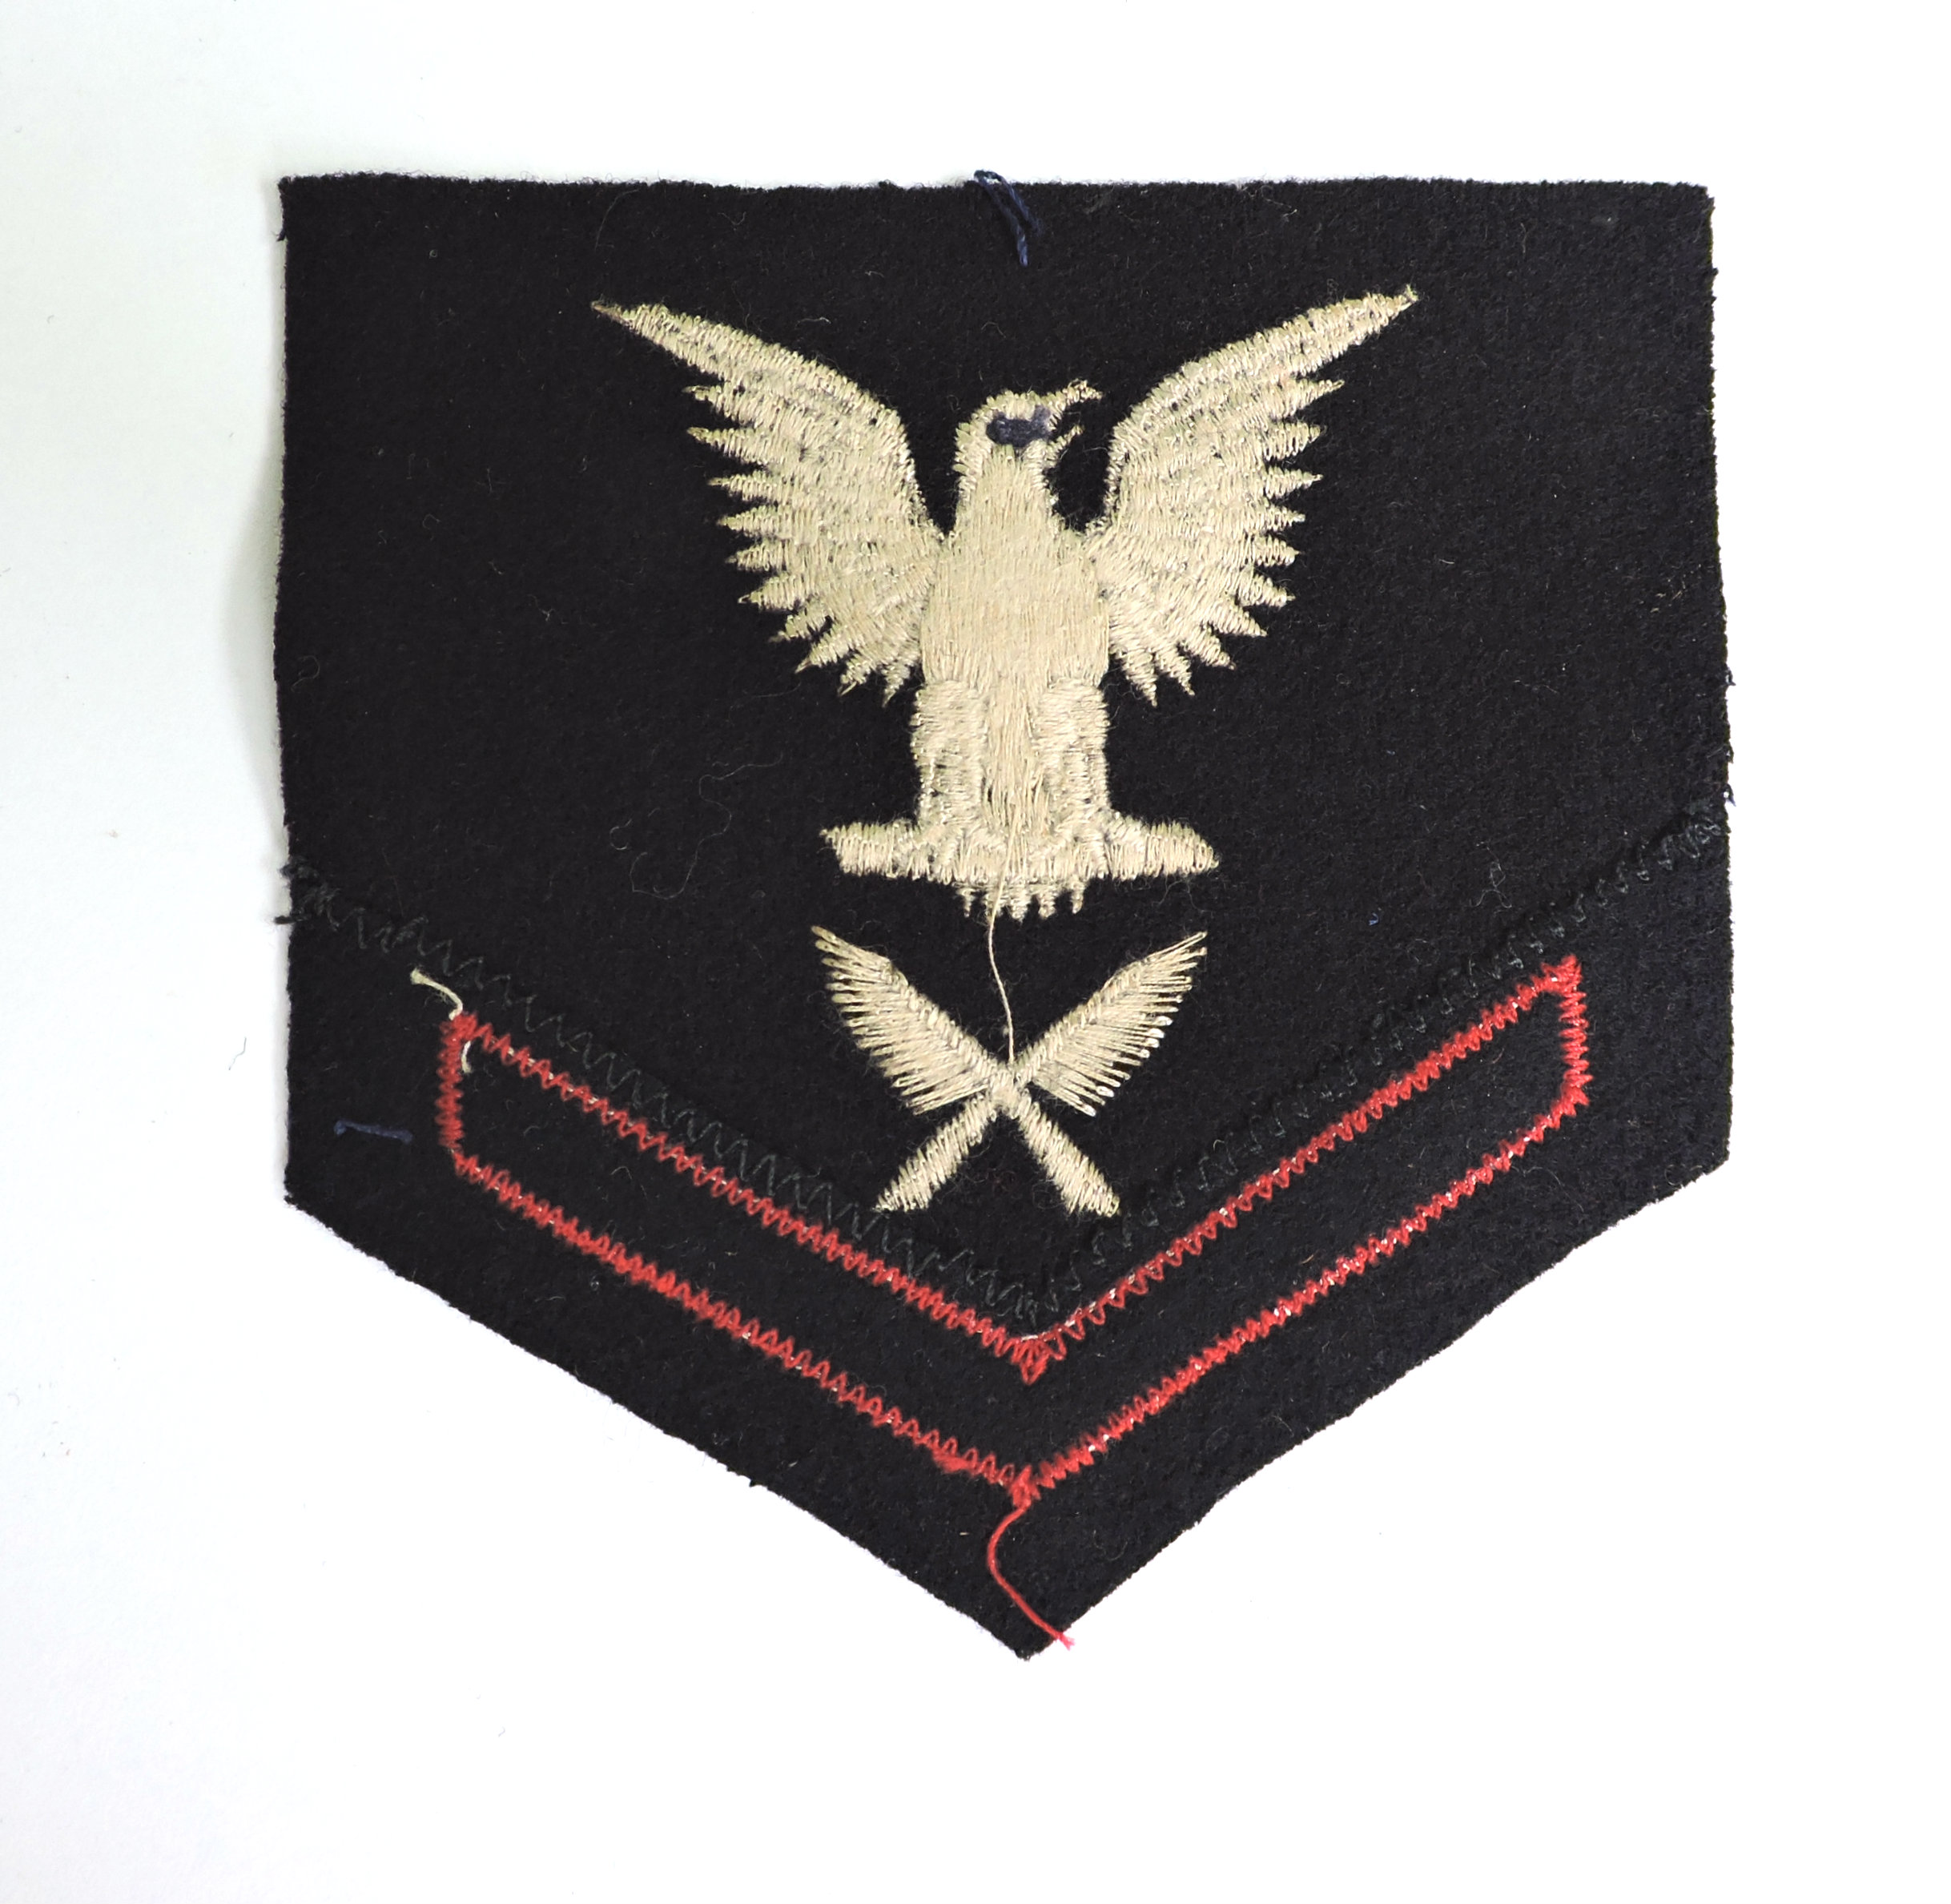 Sleeve rate Petty Officer 3rd class E-4 Yeoman